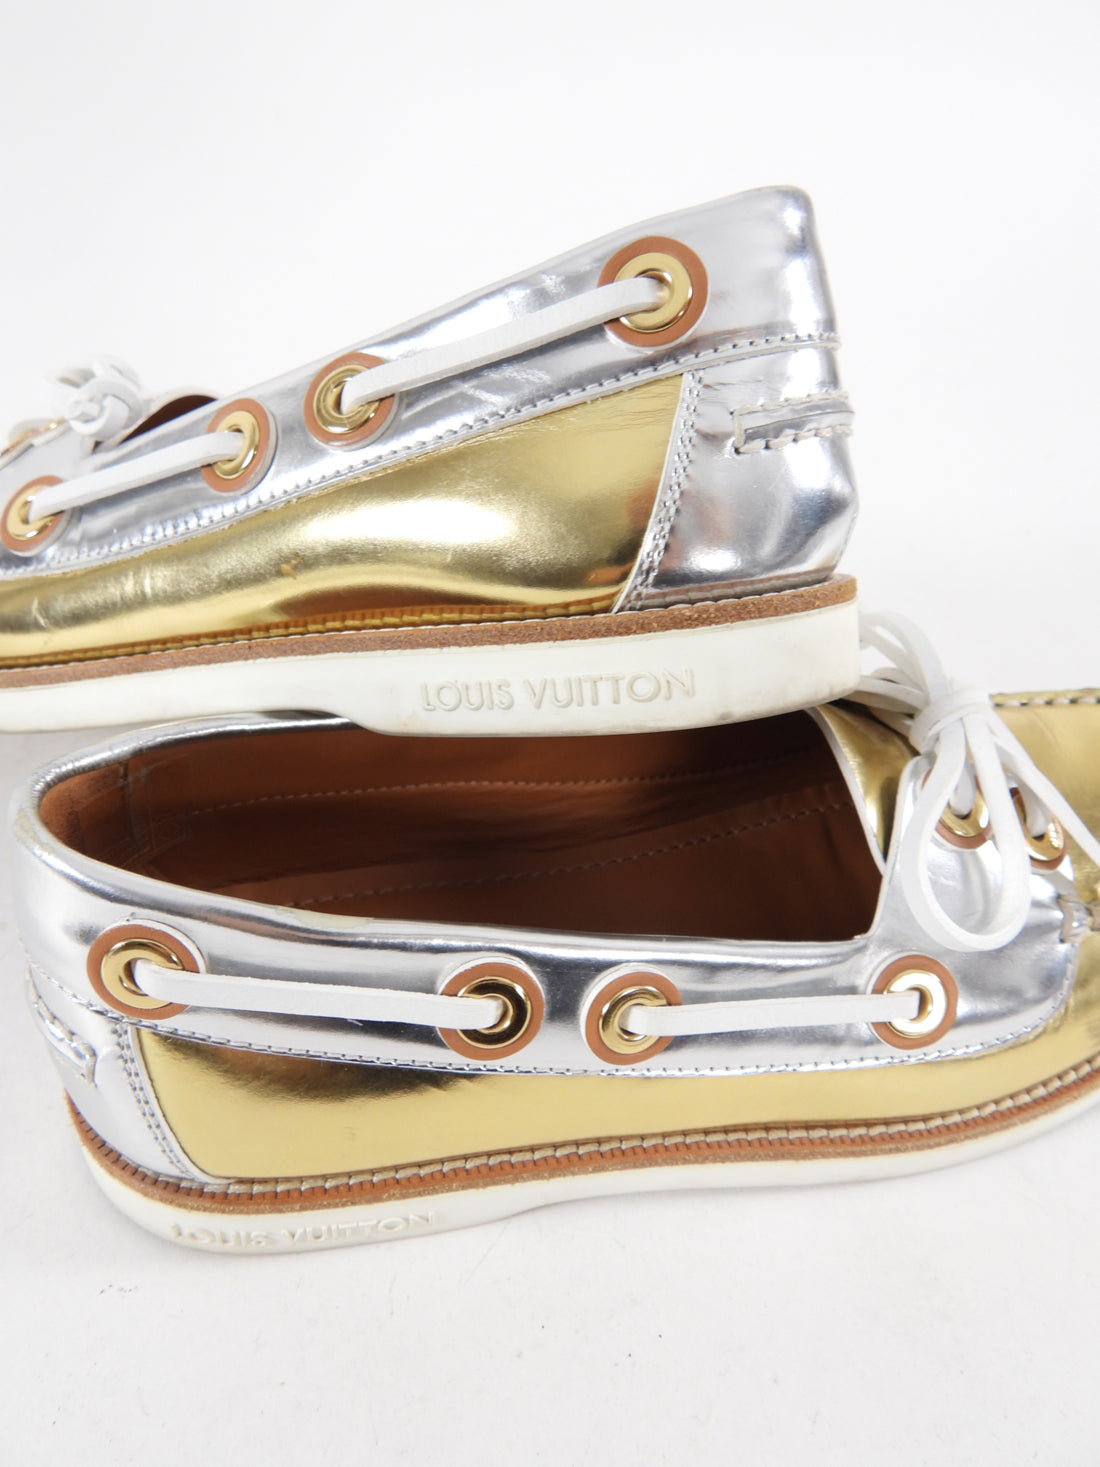 Louis Vuitton Gold and Silver Metallic Boat Shoes - USA 6